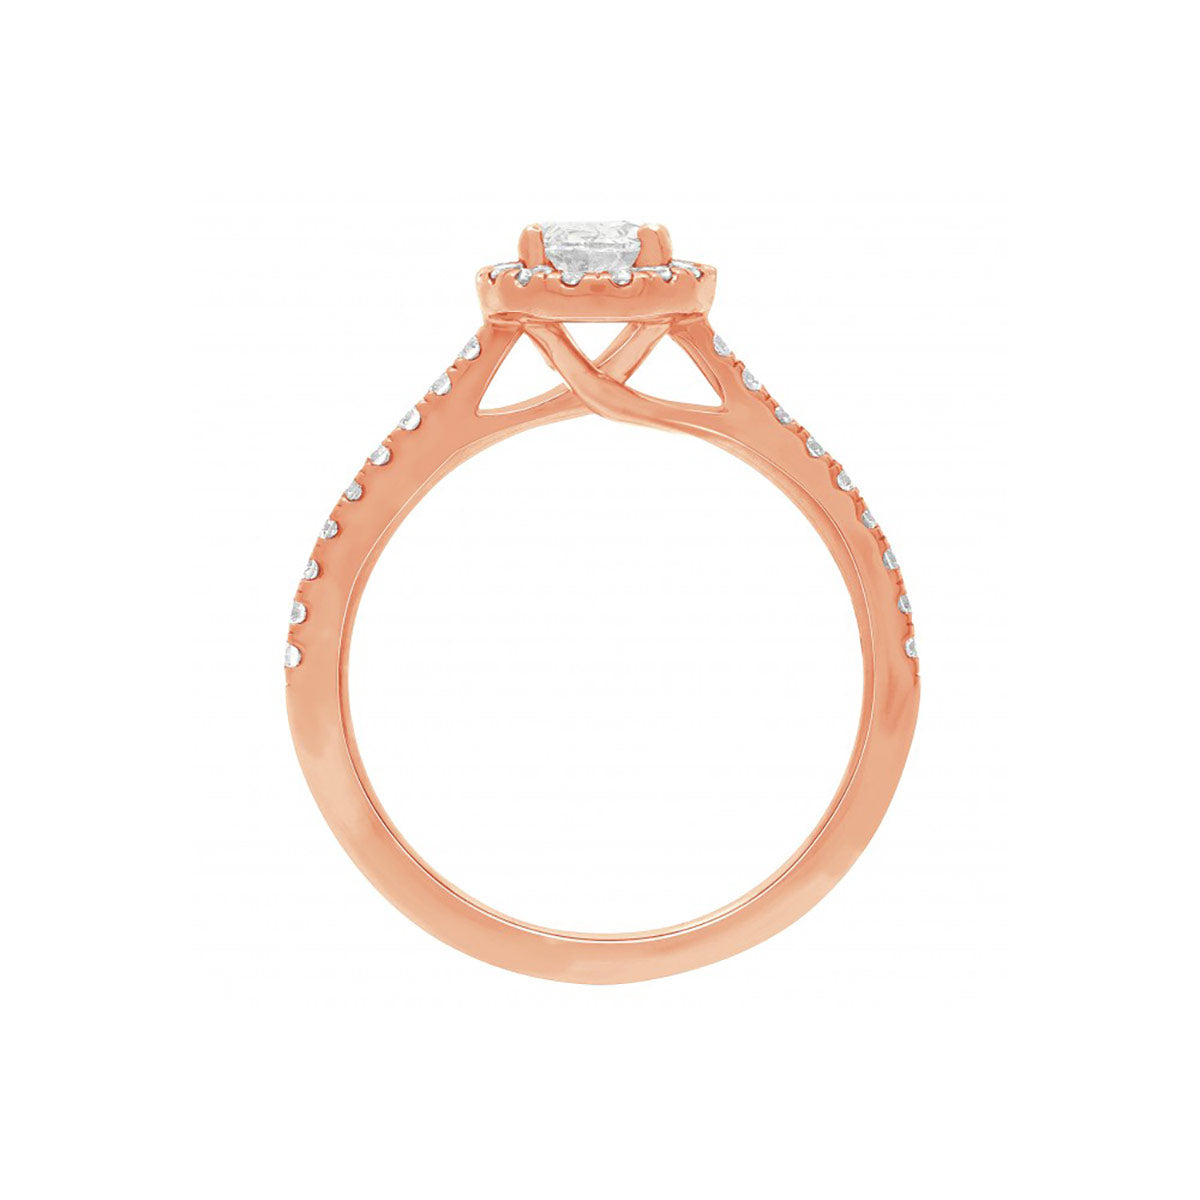 Round Halo Diamond Ring in rose gold , standing upright, with a white background